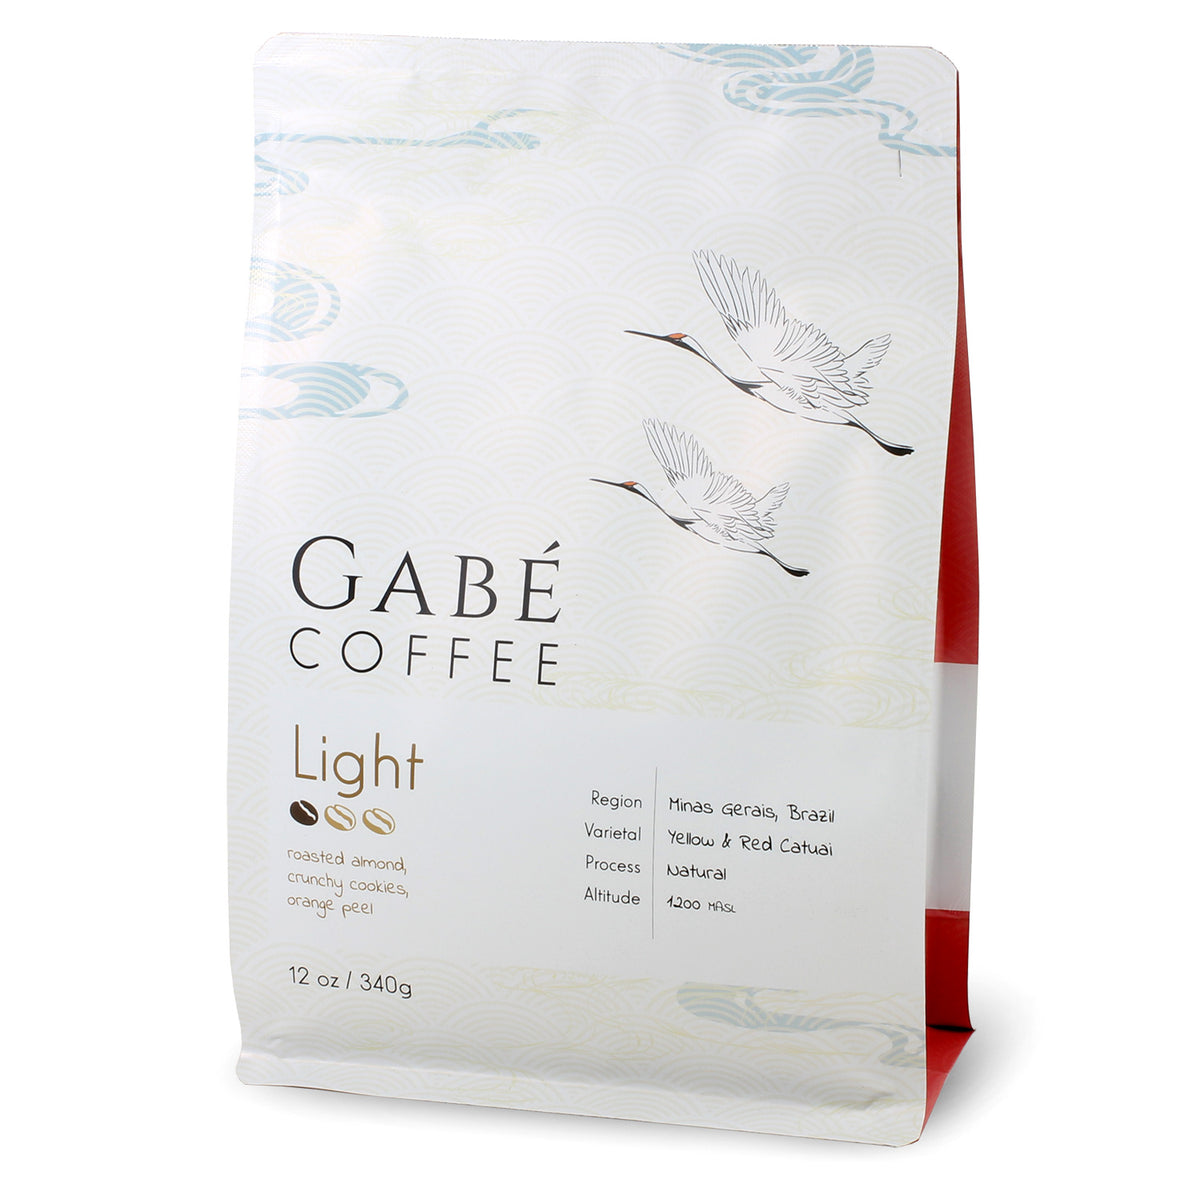 Gabé Coffee - Light Roast Whole Bean Coffee - Aromatic steam rising from a cup brewed using Gabe Coffee's light roast beans.